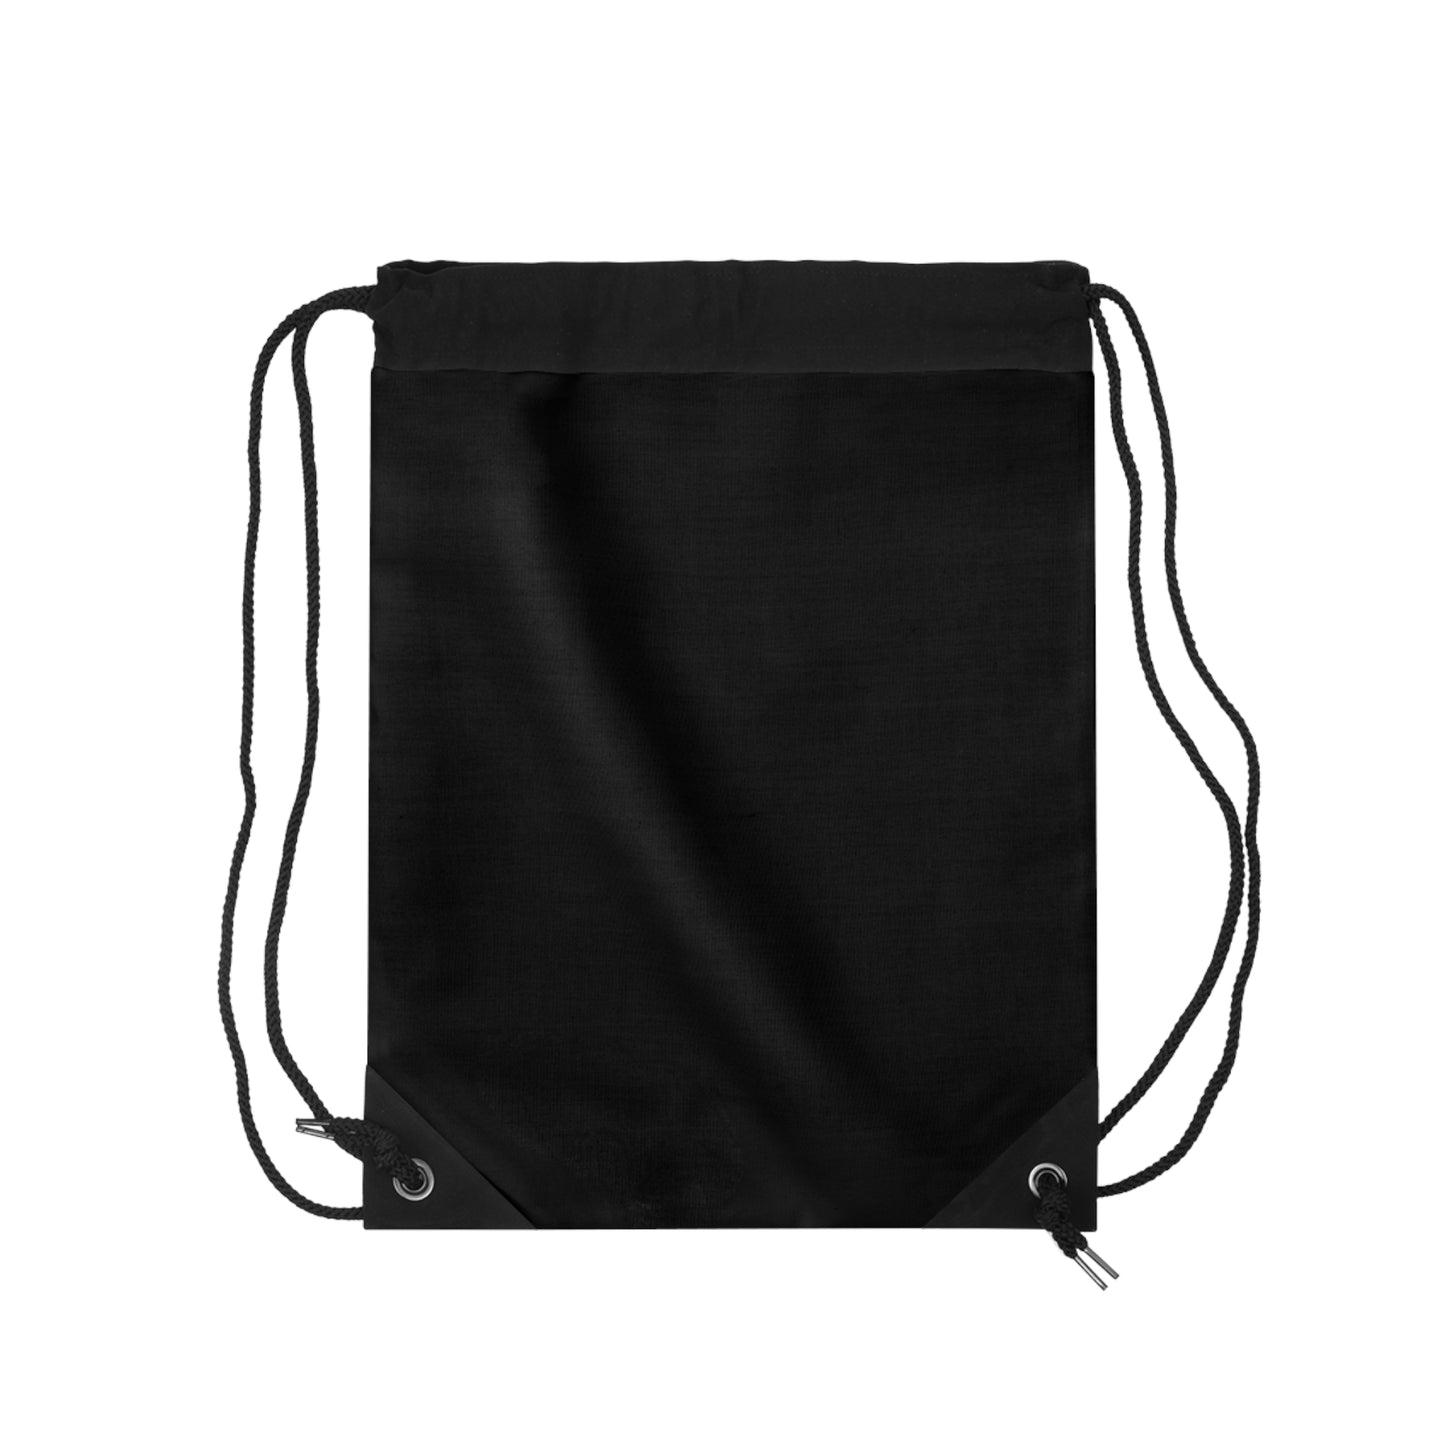 In God I Rise Down But Never Defeated Drawstring Bag